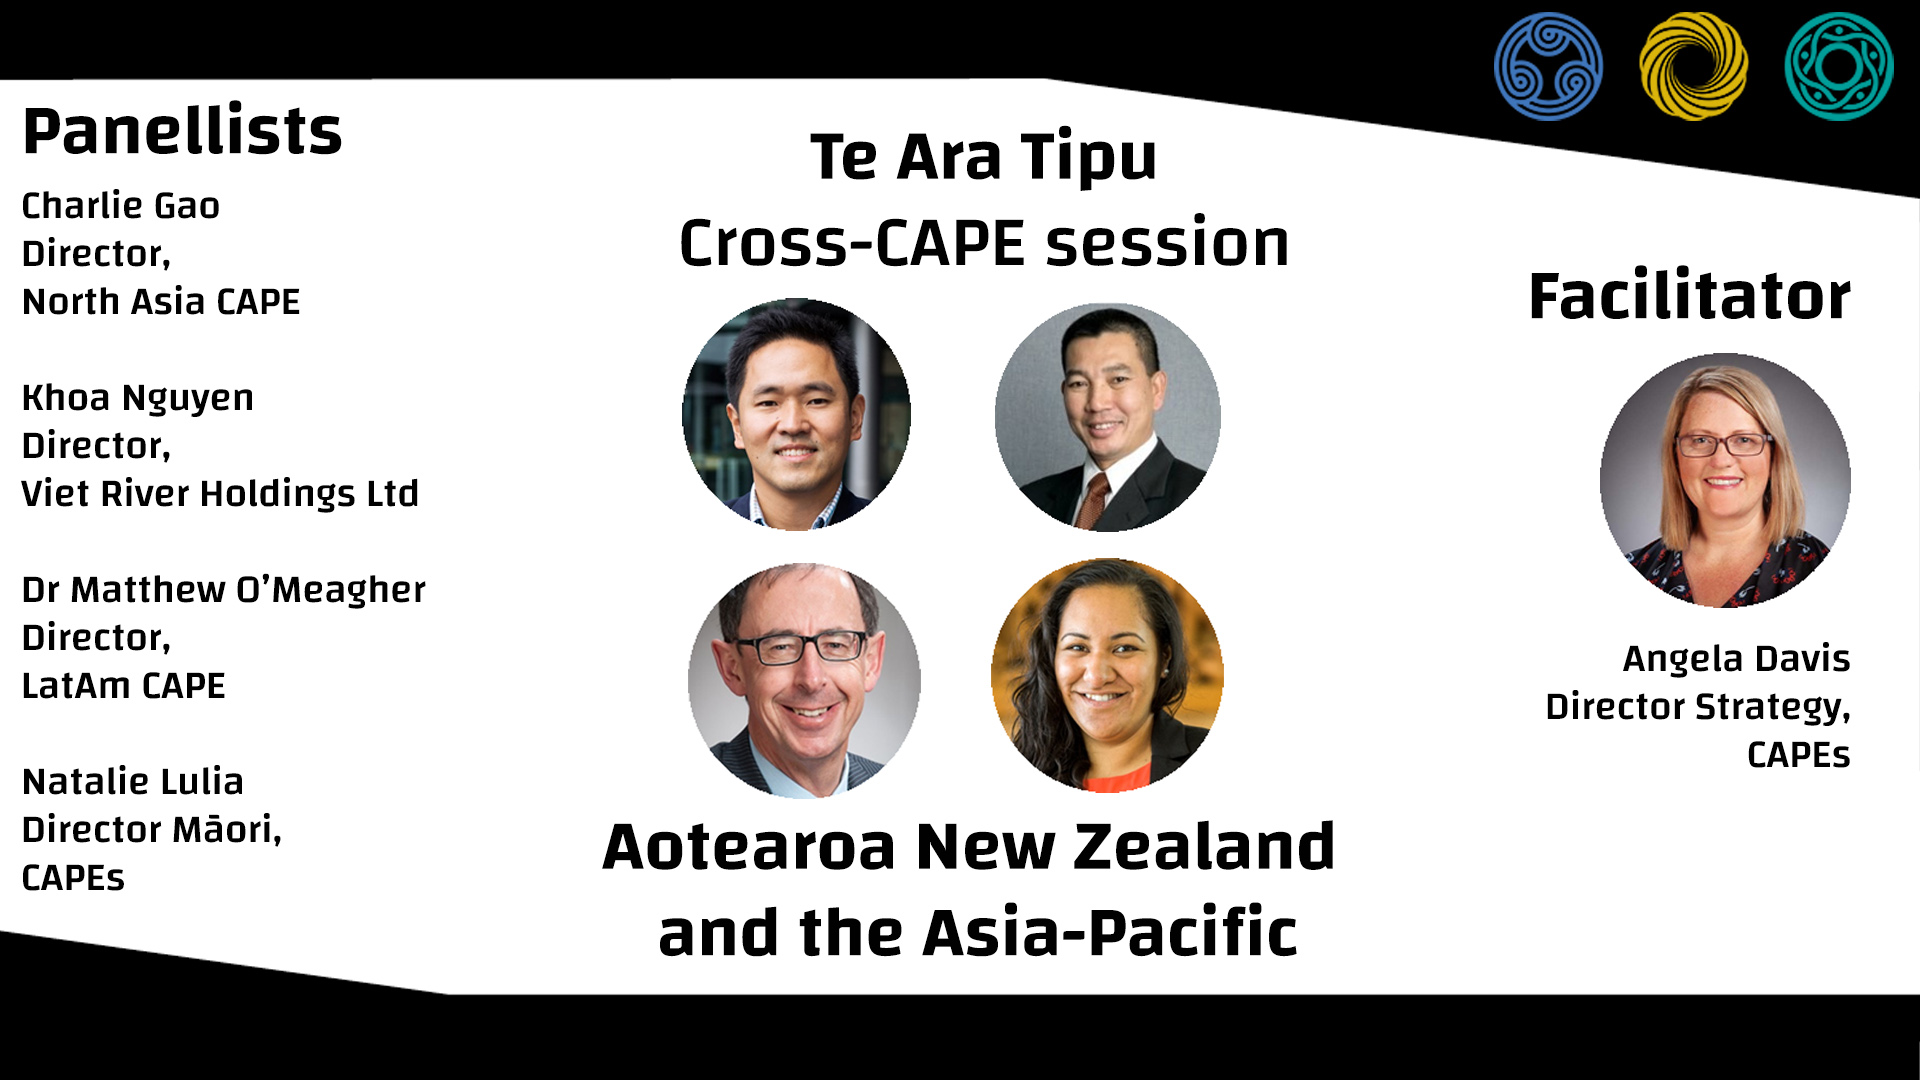 A banner image promoting the Te Ara Tipu session in May 2022